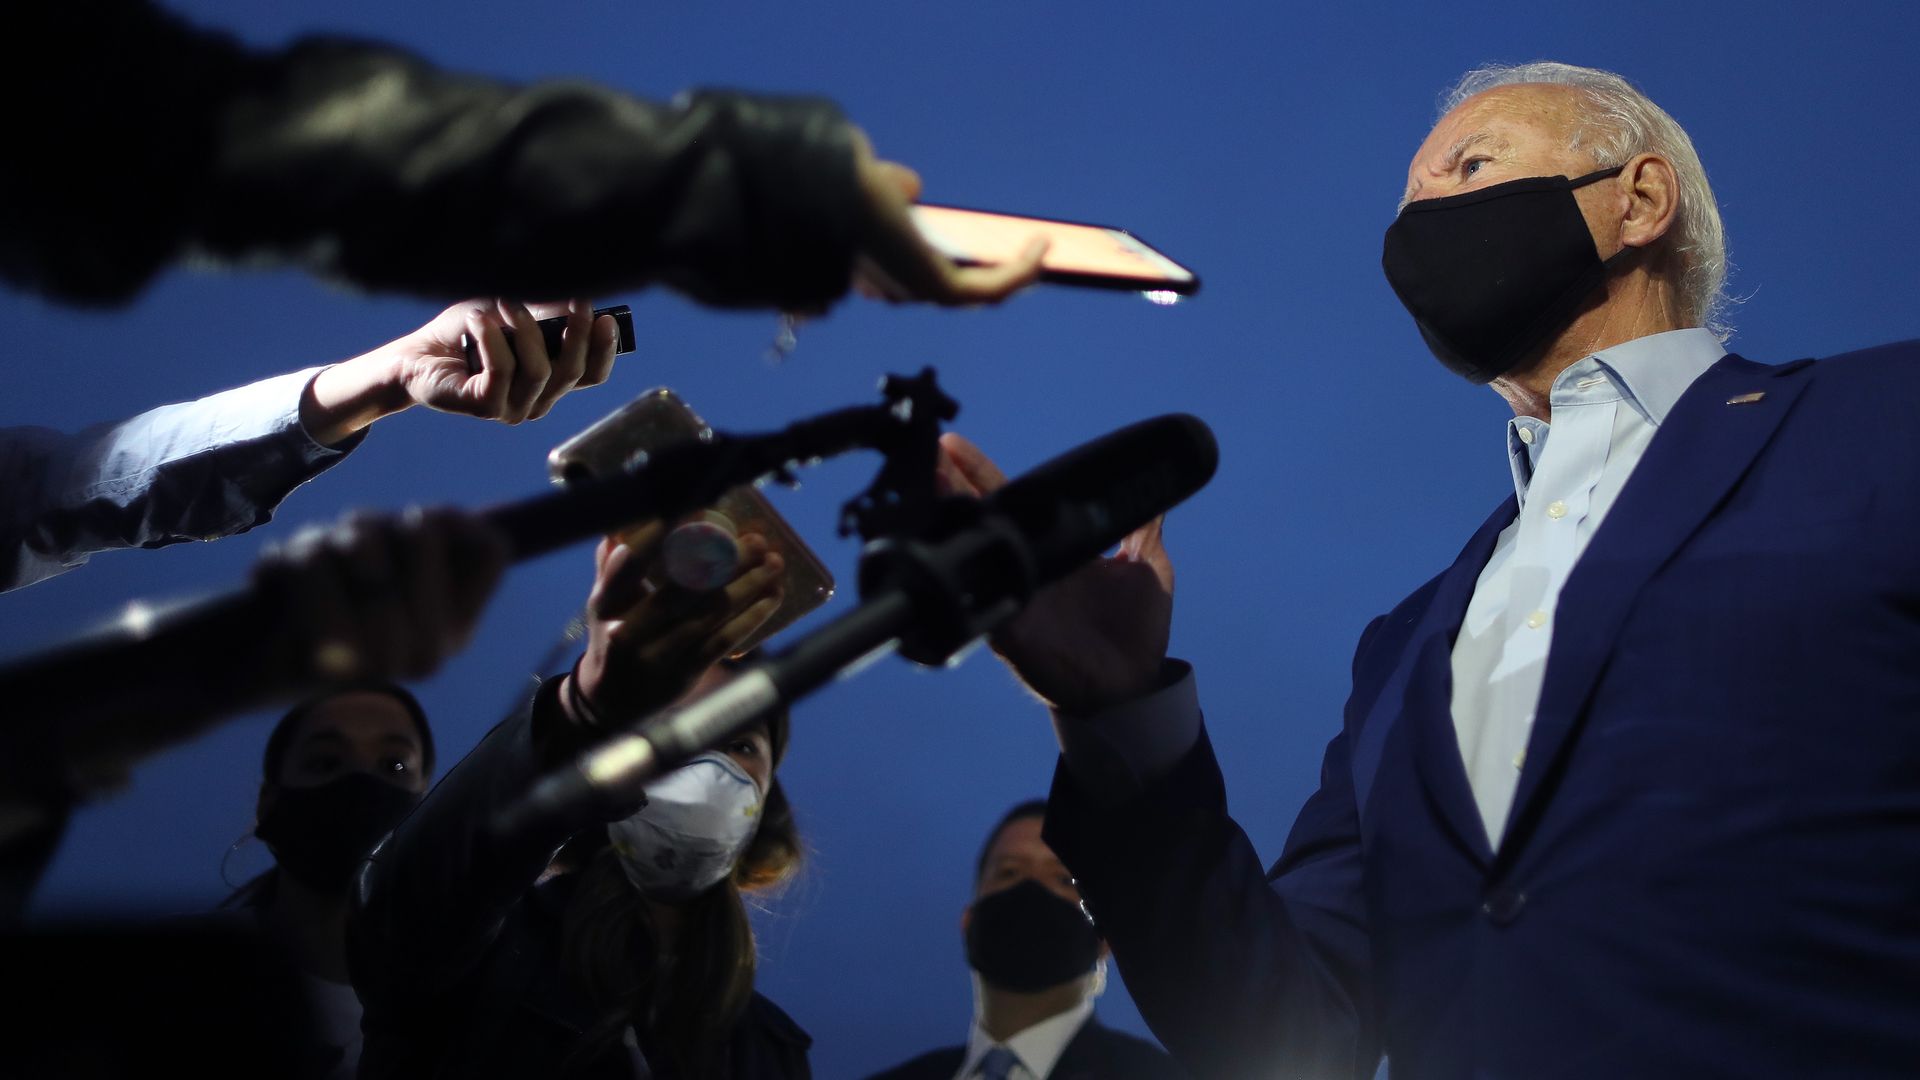 Biden wears a face mask while talking to the press